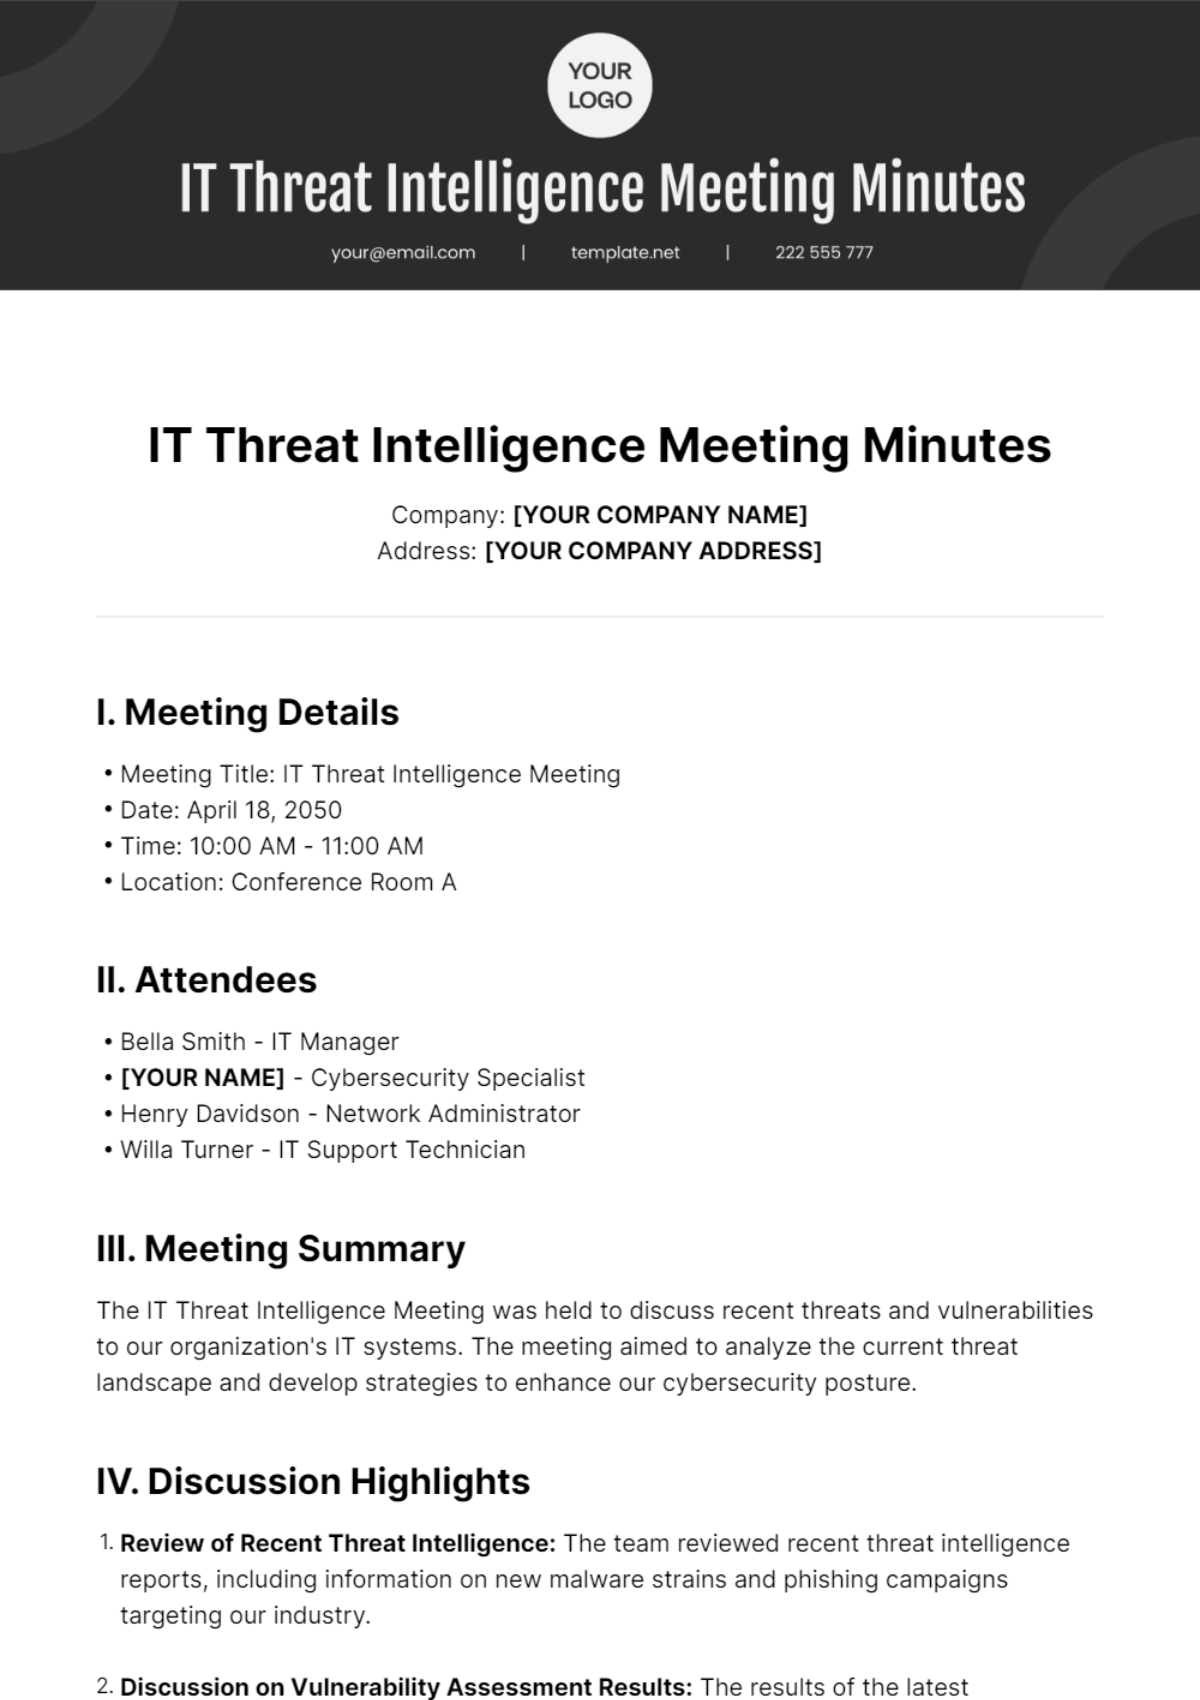 IT Threat Intelligence Meeting Minutes Template